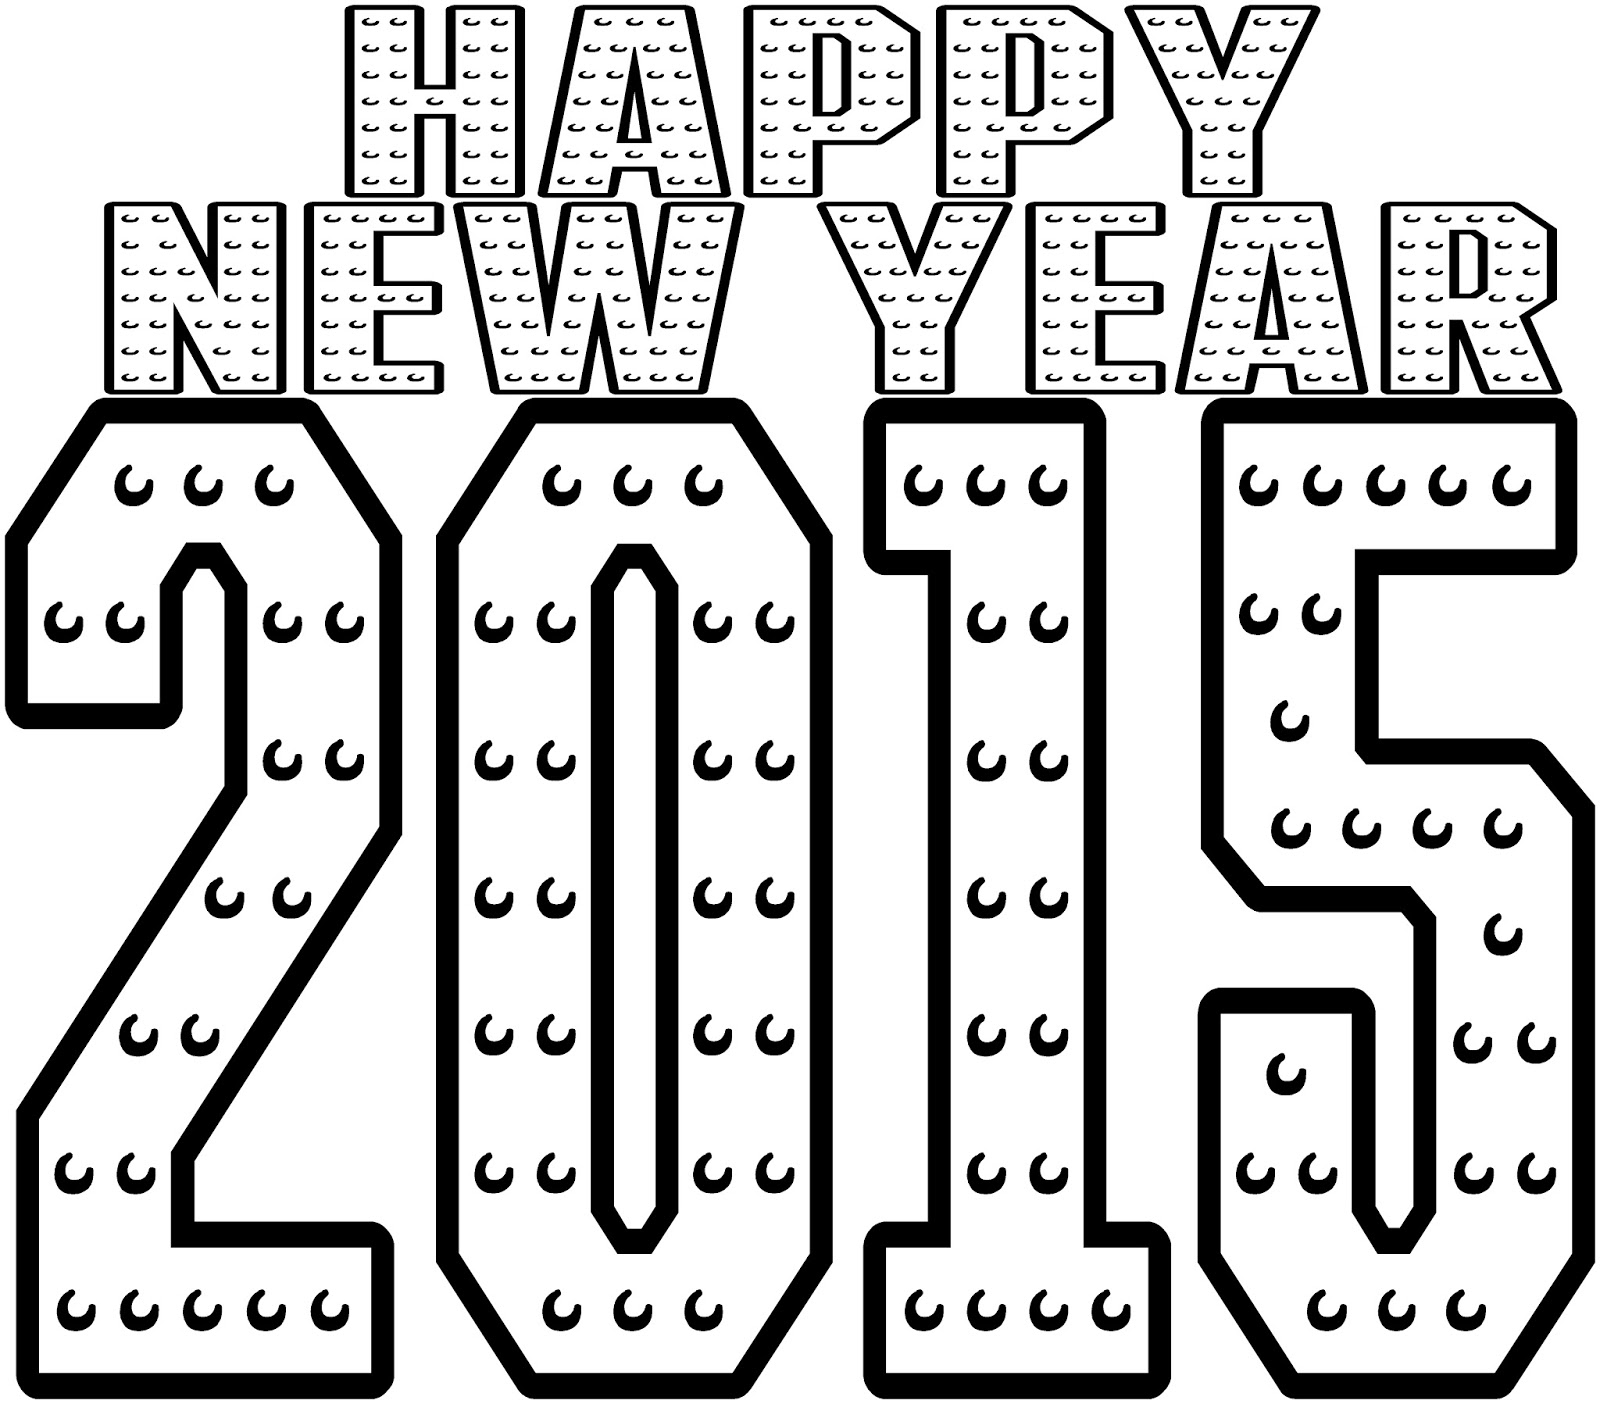  Happy New Year 2015 Preschool Coloring Pages | Kids coloring pages